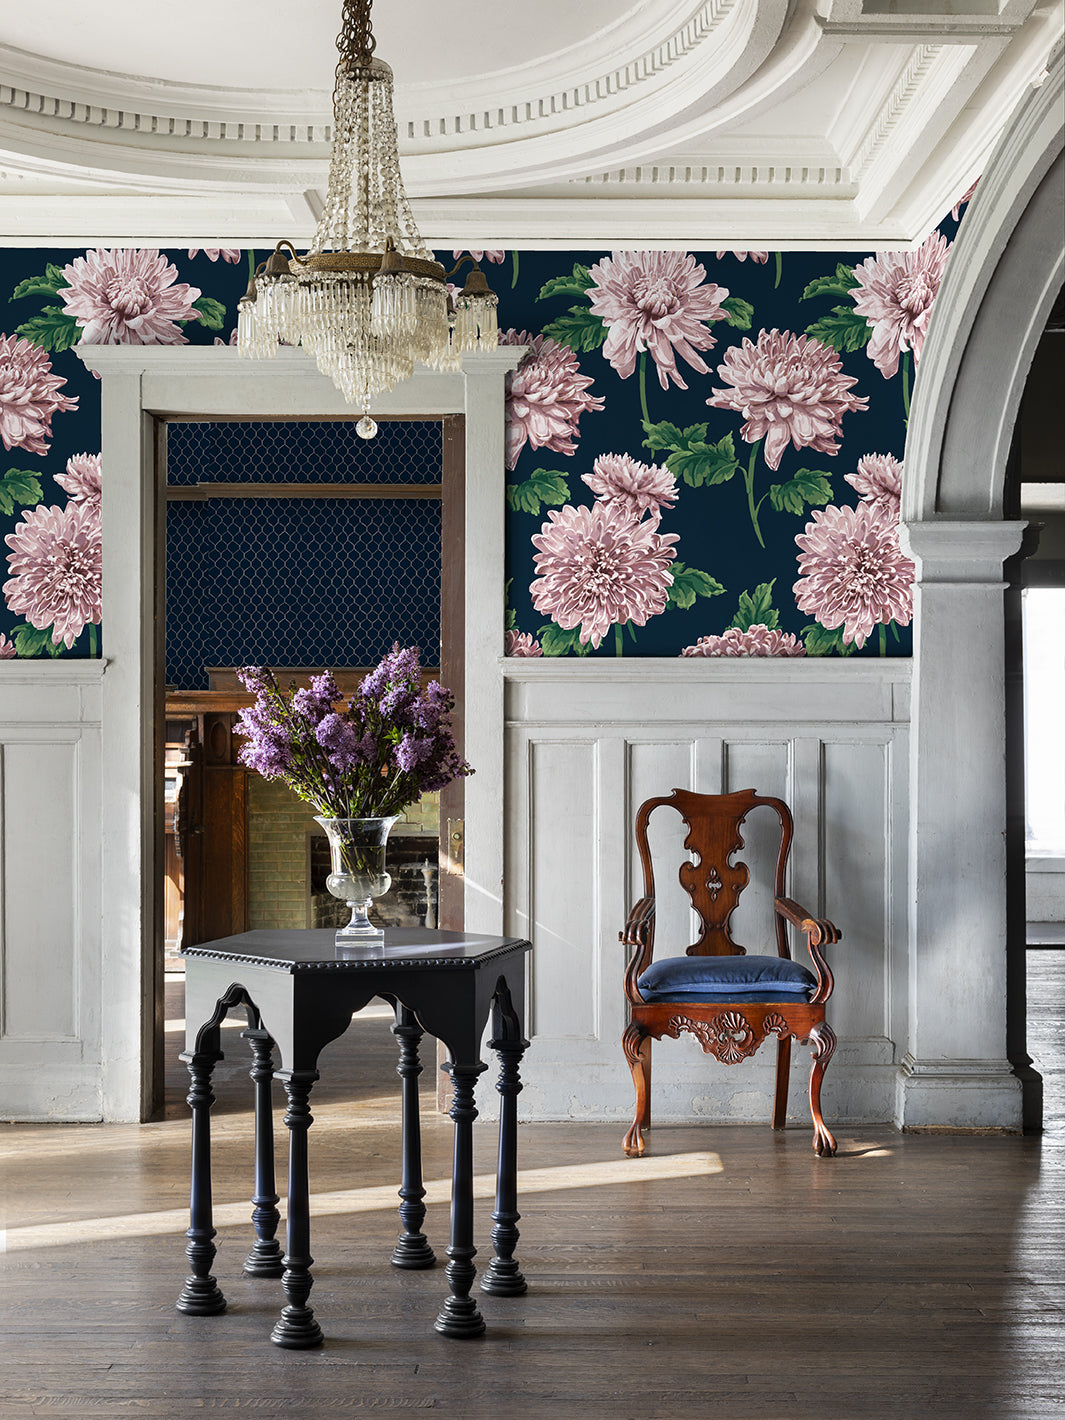 'Mums for Marion' Wallpaper by Sarah Jessica Parker - Navy